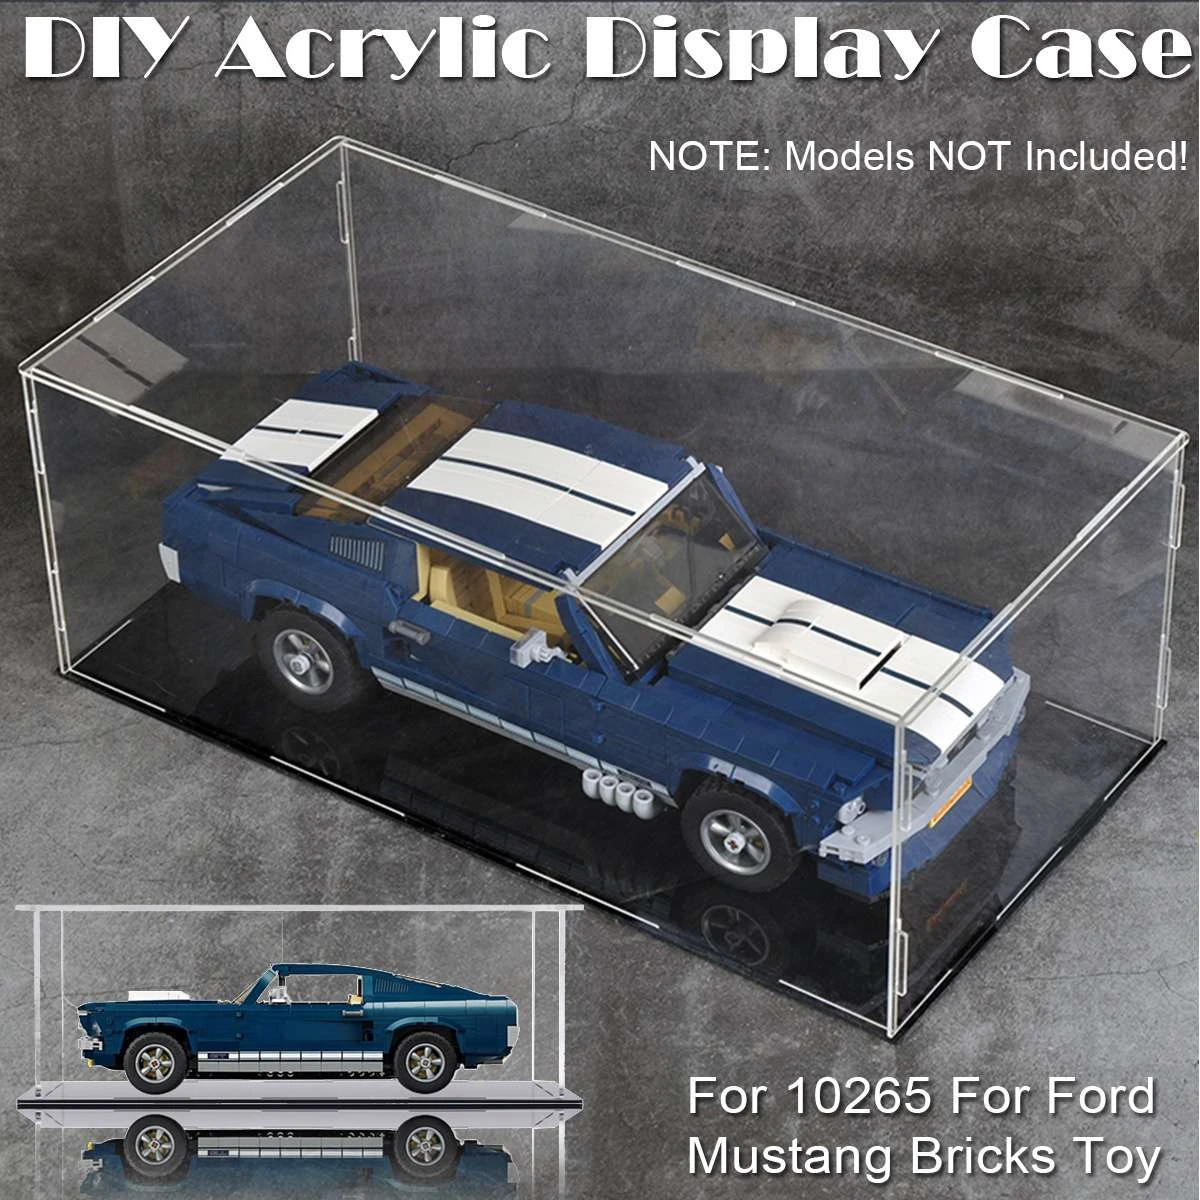 DIY Acrylic Display Case Self Install Clear Cube Display Box Dustproof  ShowCase For LEGO 10265 For Ford Mustang Bricks Toy|Model Accessories| -  AliExpress